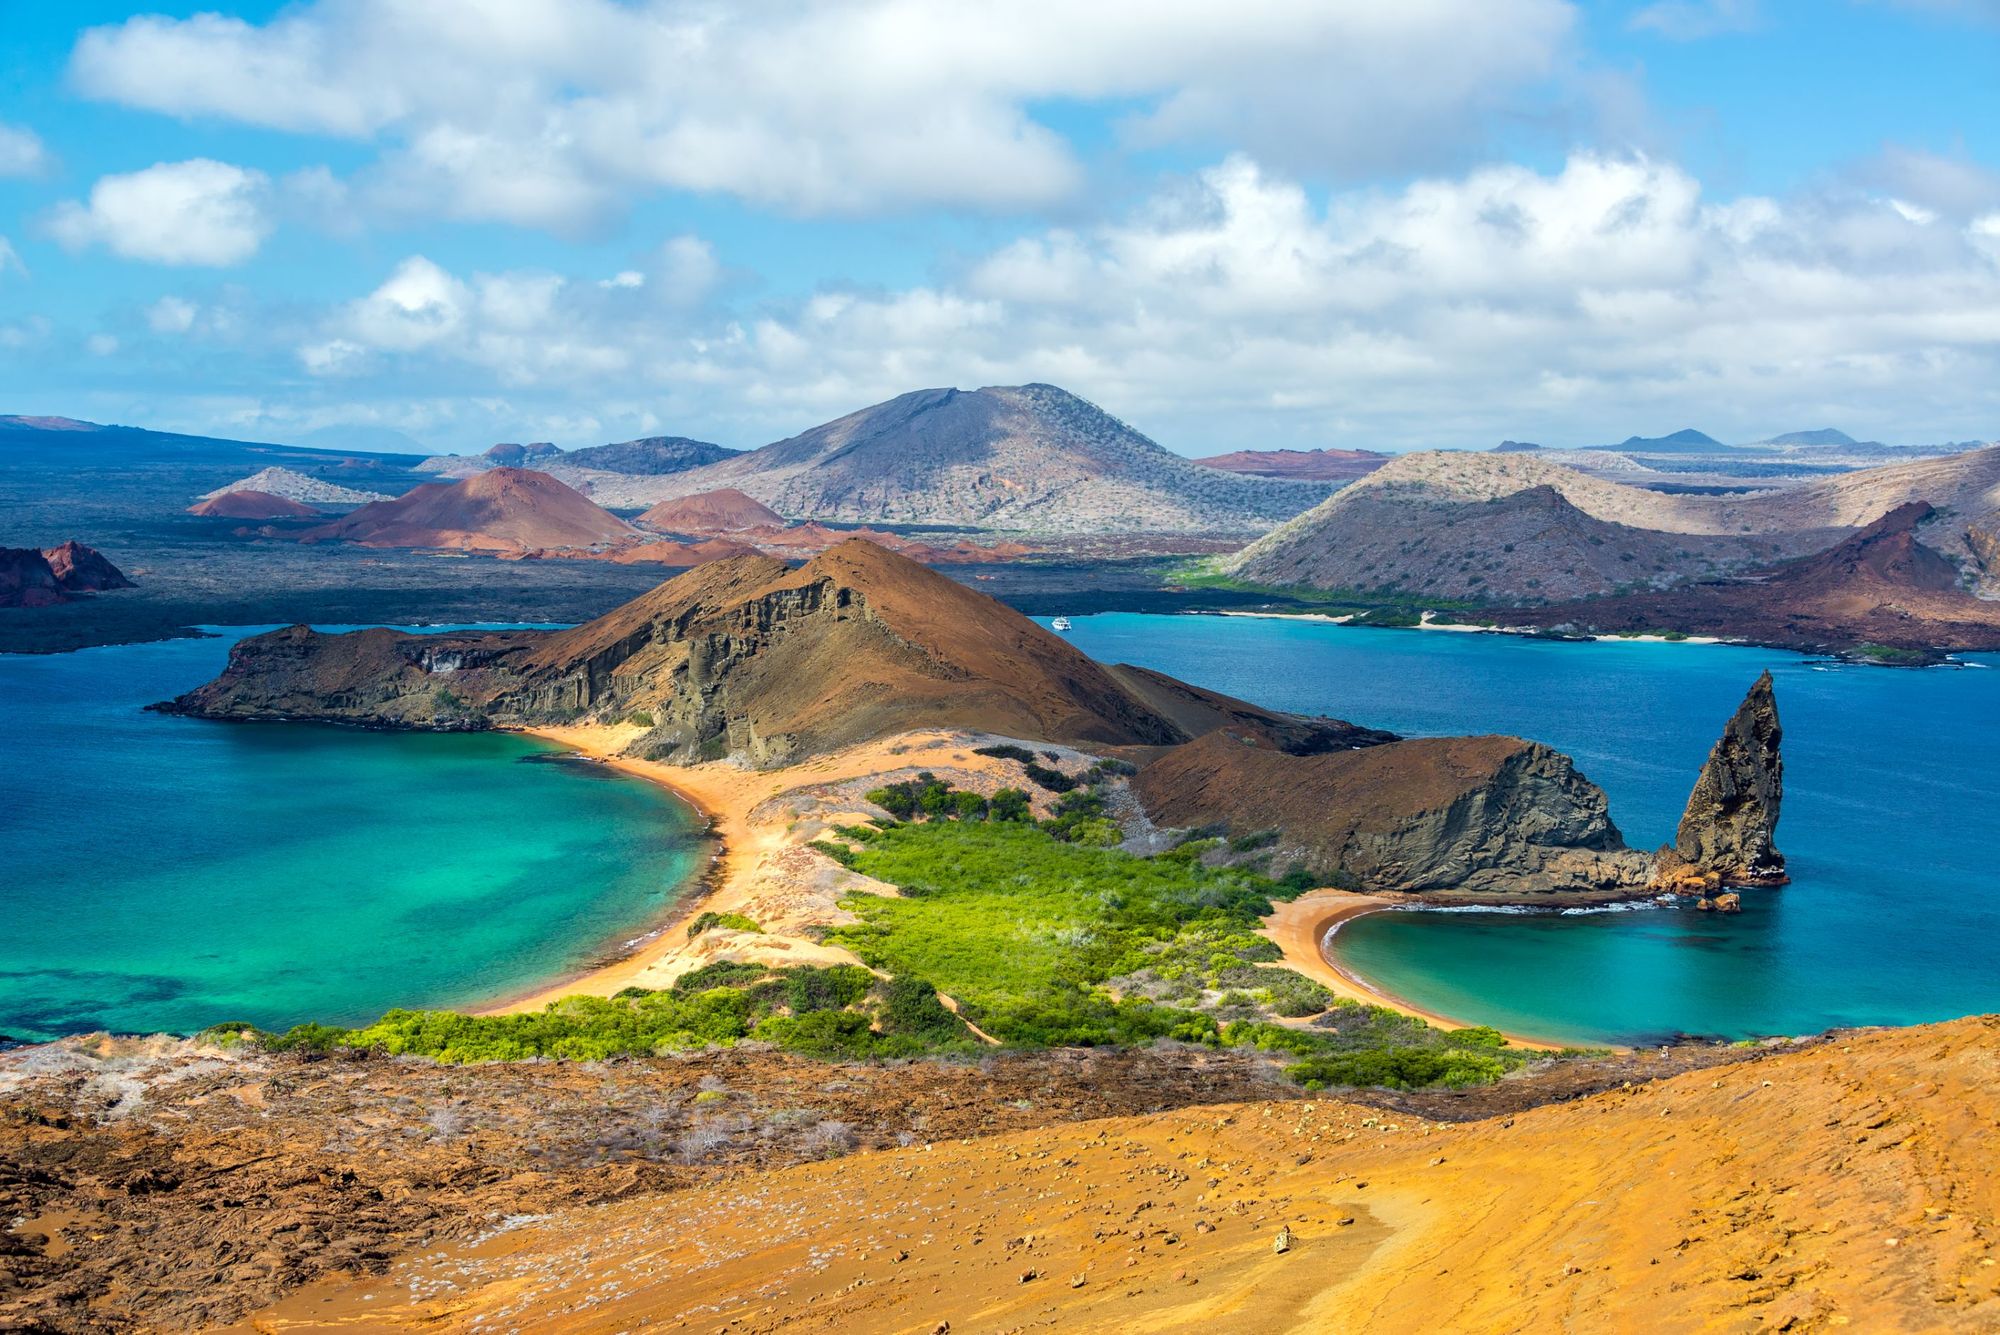 The otherworldy landscape of the Galapagos Island is home to all sorts of wildlife, hidden amongst the greenery and in the waters. Photo: Getty